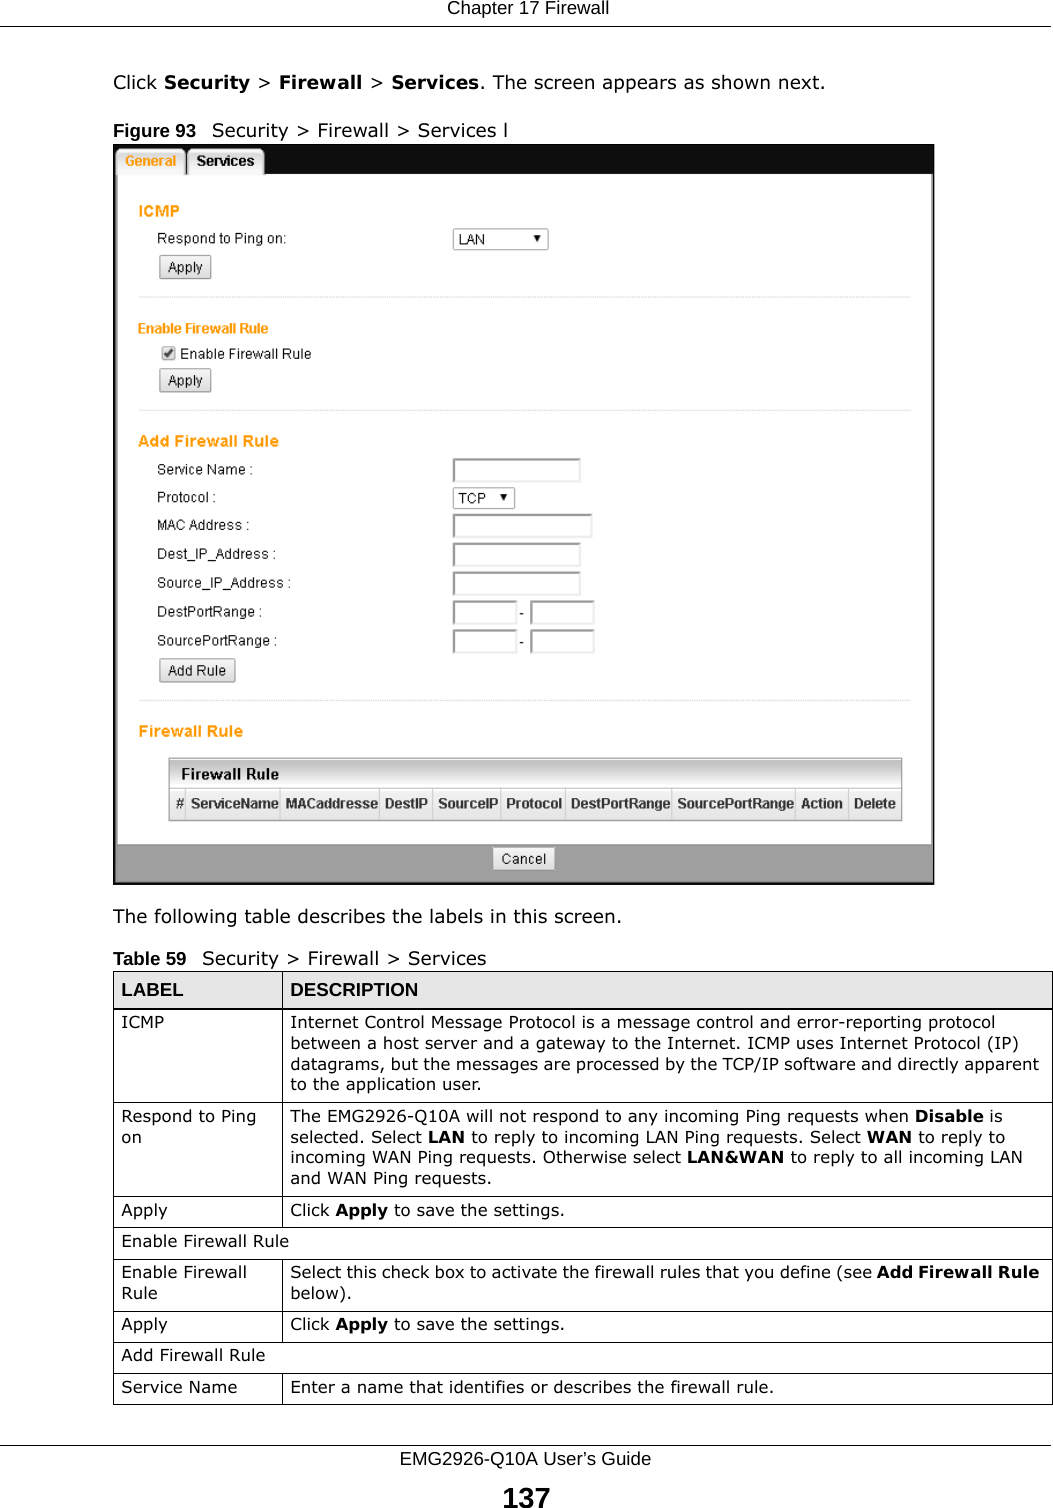  Chapter 17 FirewallEMG2926-Q10A User’s Guide137Click Security &gt; Firewall &gt; Services. The screen appears as shown next. Figure 93   Security &gt; Firewall &gt; Services lThe following table describes the labels in this screen.Table 59   Security &gt; Firewall &gt; ServicesLABEL DESCRIPTIONICMP Internet Control Message Protocol is a message control and error-reporting protocol between a host server and a gateway to the Internet. ICMP uses Internet Protocol (IP) datagrams, but the messages are processed by the TCP/IP software and directly apparent to the application user. Respond to Ping onThe EMG2926-Q10A will not respond to any incoming Ping requests when Disable is selected. Select LAN to reply to incoming LAN Ping requests. Select WAN to reply to incoming WAN Ping requests. Otherwise select LAN&amp;WAN to reply to all incoming LAN and WAN Ping requests. Apply Click Apply to save the settings. Enable Firewall RuleEnable Firewall RuleSelect this check box to activate the firewall rules that you define (see Add Firewall Rule below).Apply Click Apply to save the settings. Add Firewall RuleService Name Enter a name that identifies or describes the firewall rule.